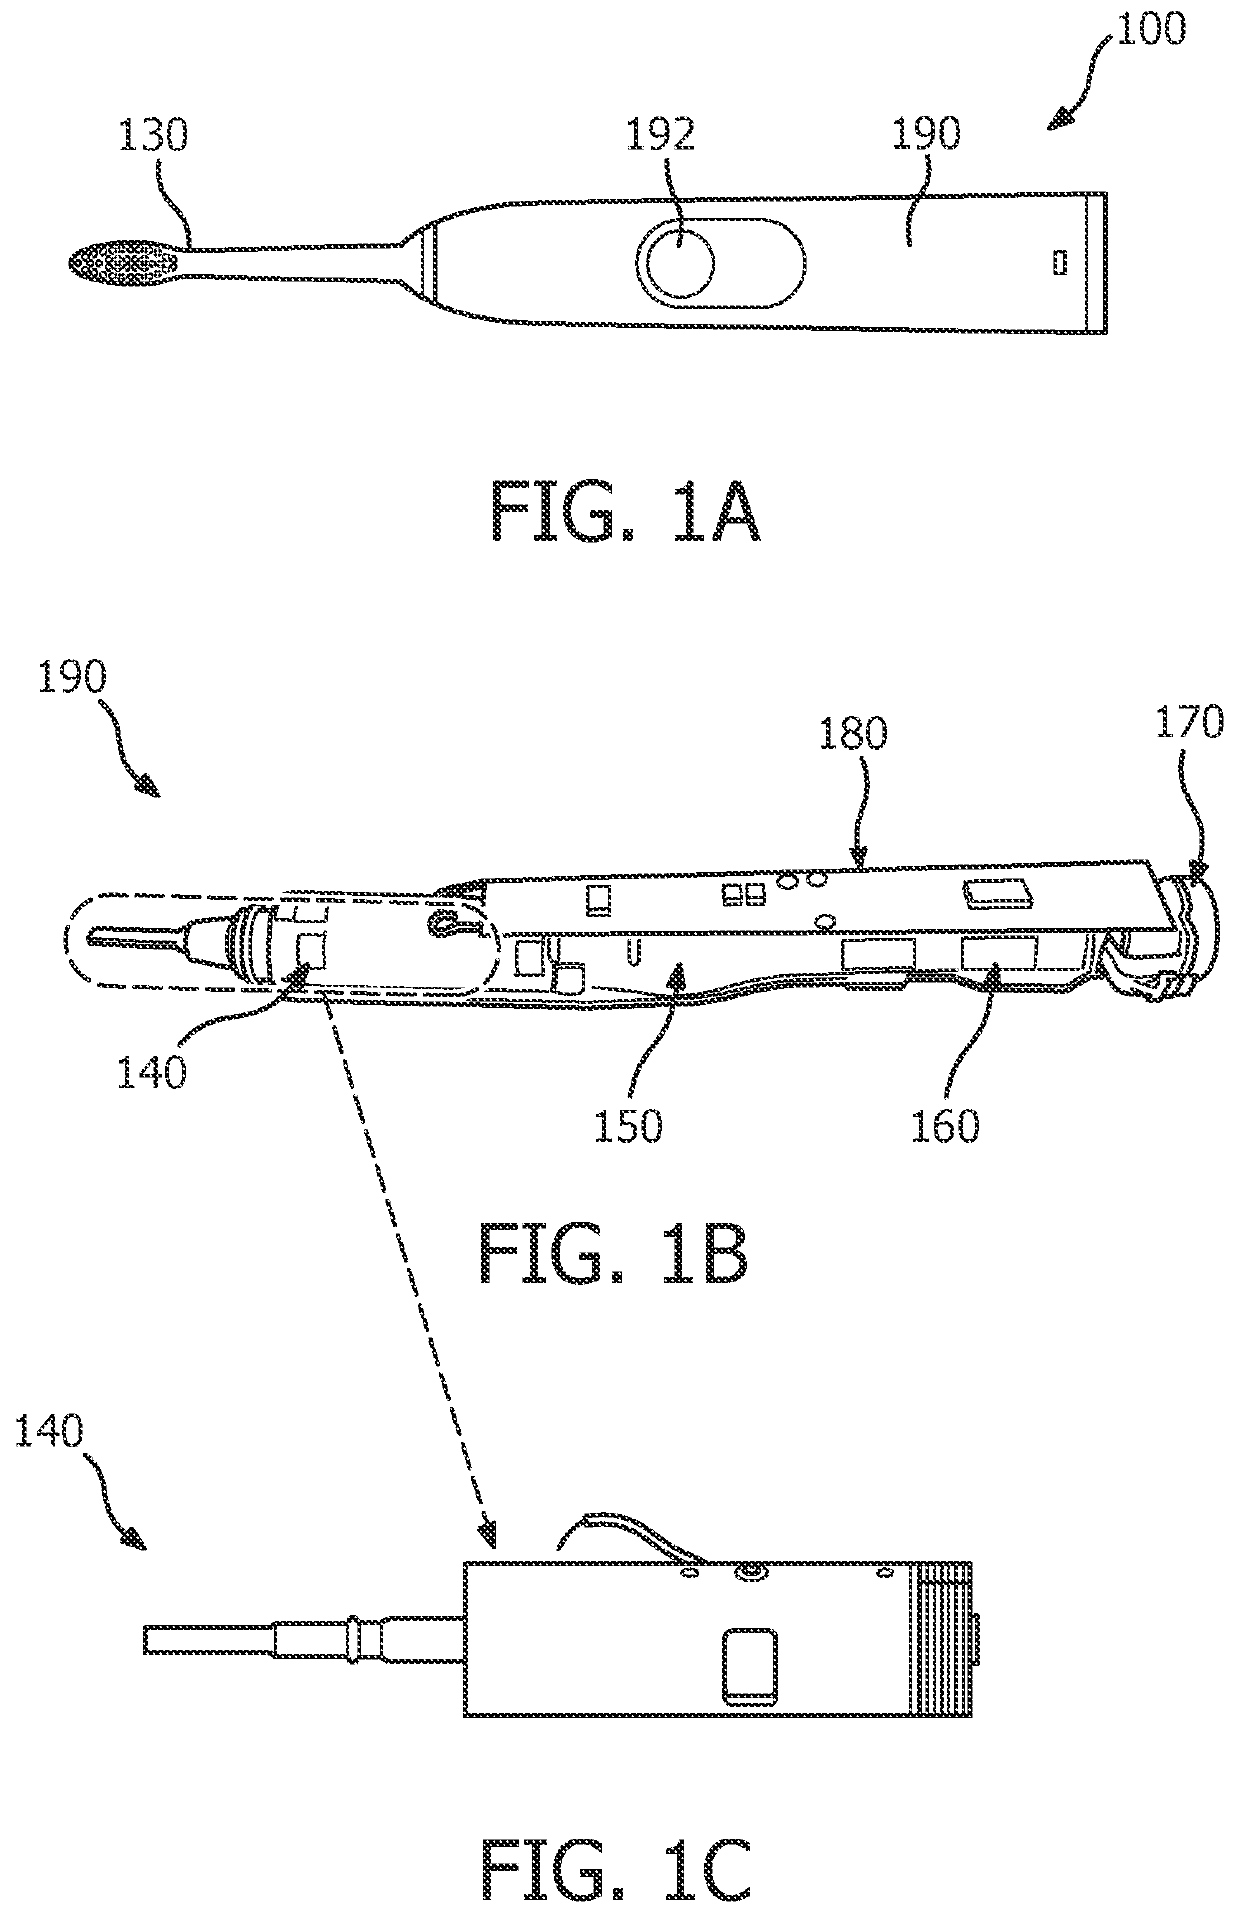 Use of resonant systems to automatically modify power (amplitude) of an oral care appliance upon use in-mouth